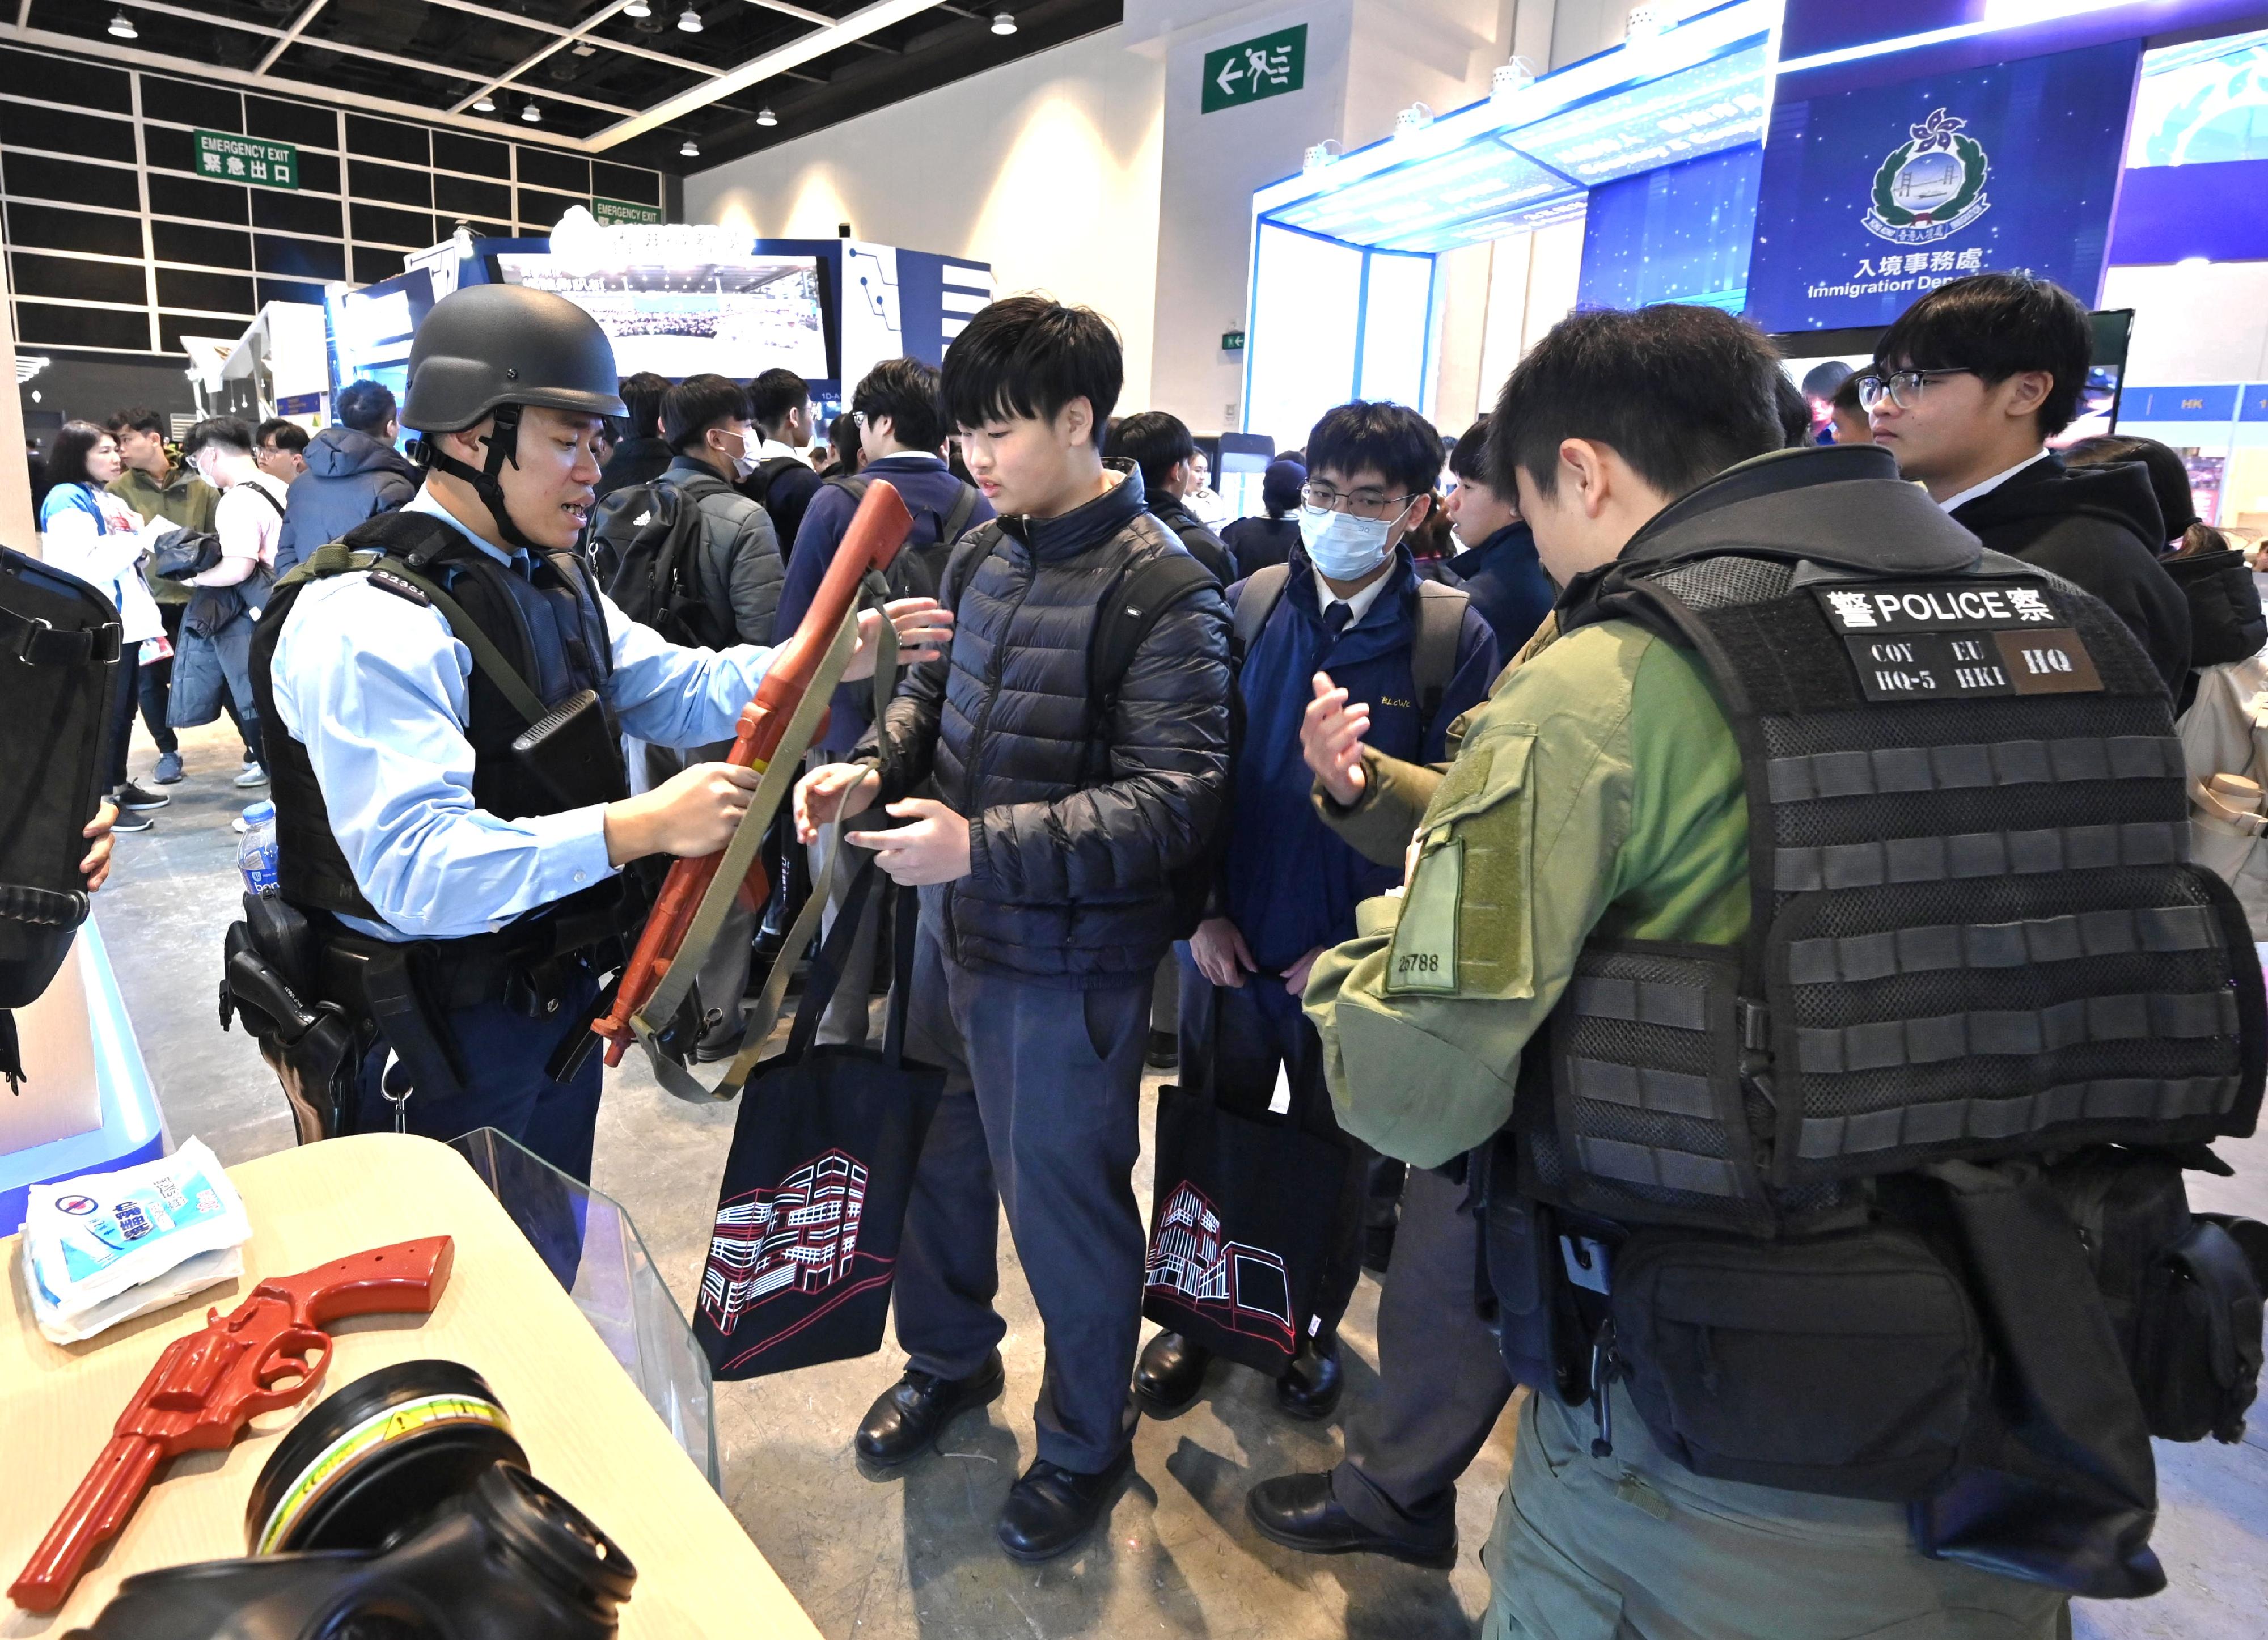 The Hong Kong Police Force introduces its work and provides recruitment information to visitors at the Education and Careers Expo 2024 for four consecutive days from today (January 25). Photo shows Emergency Unit officers briefing visitors on their areas of work and equipment.